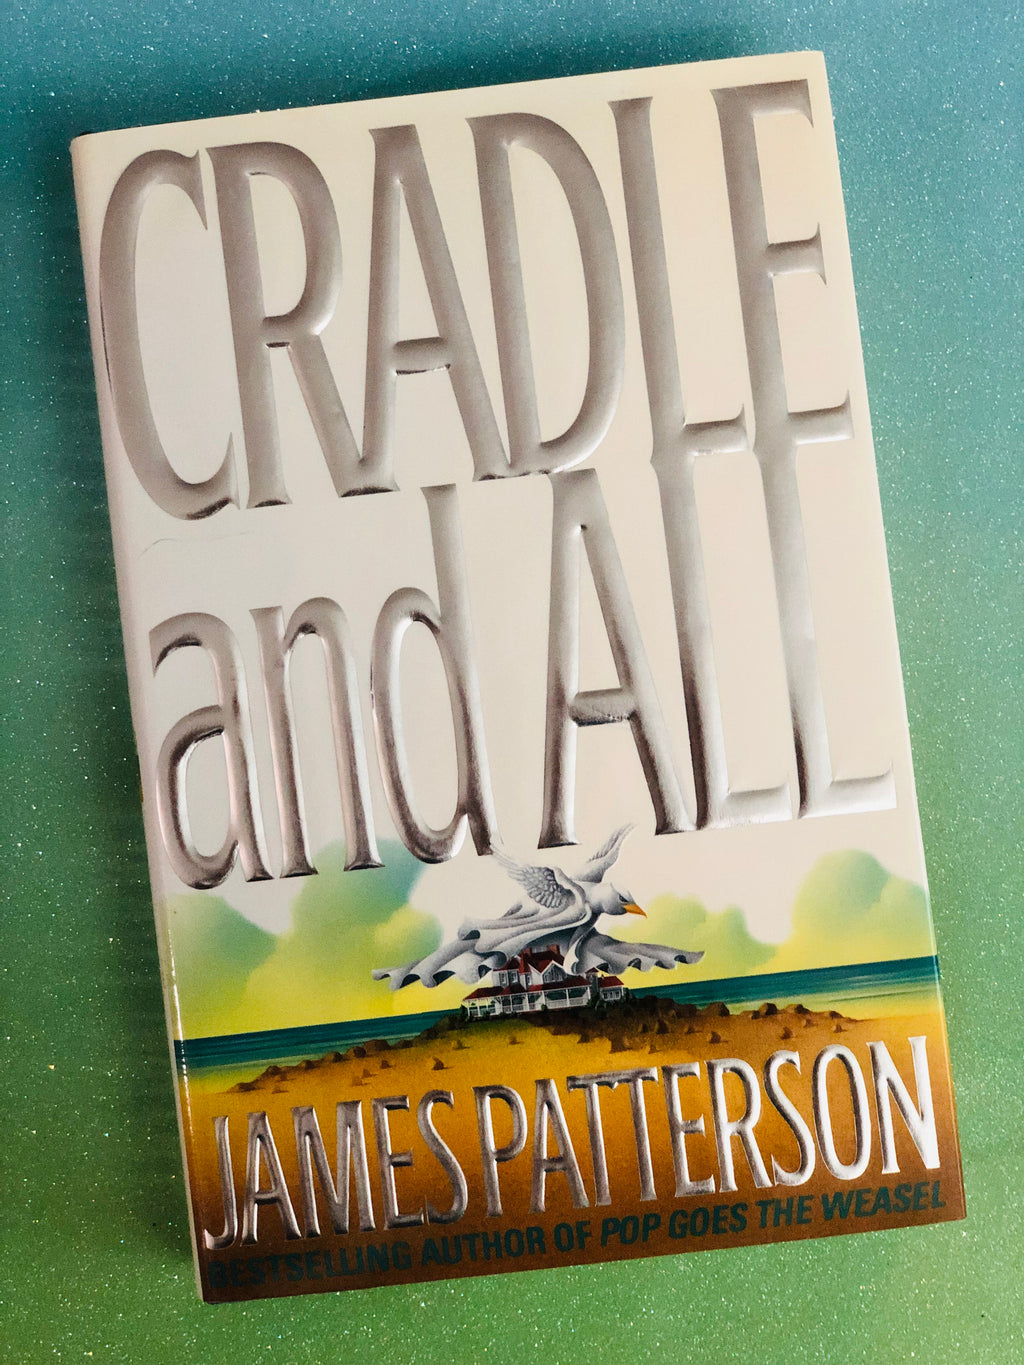 Cradle And All- By James Patterson